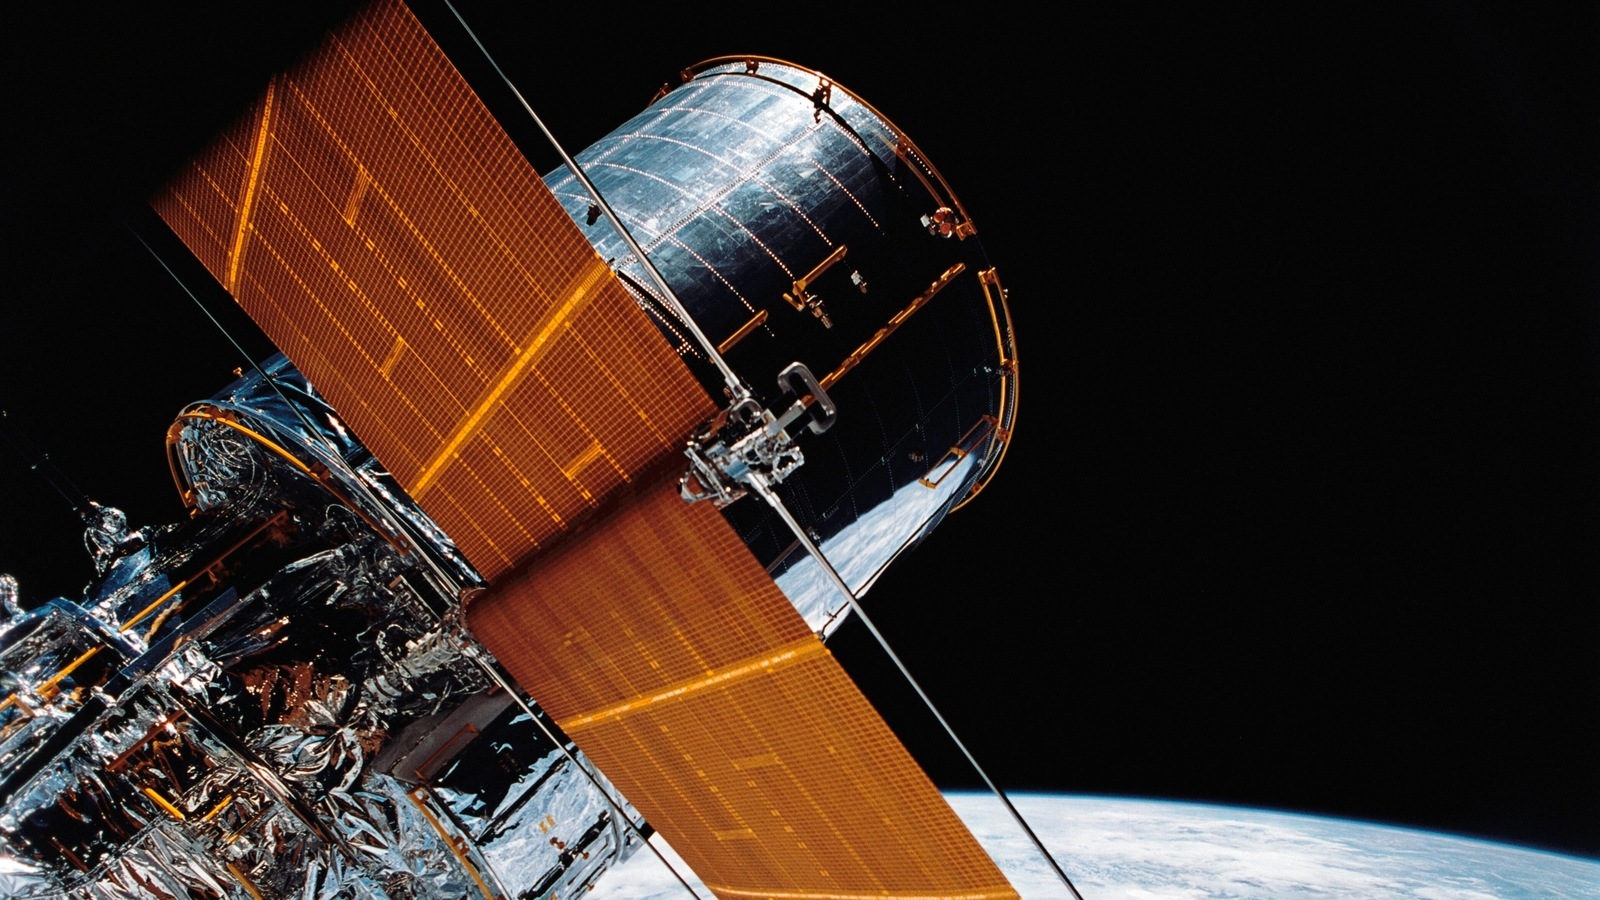 Latest Hubble Space Telescope glitch forces NASA to switch on safe mode, pause research